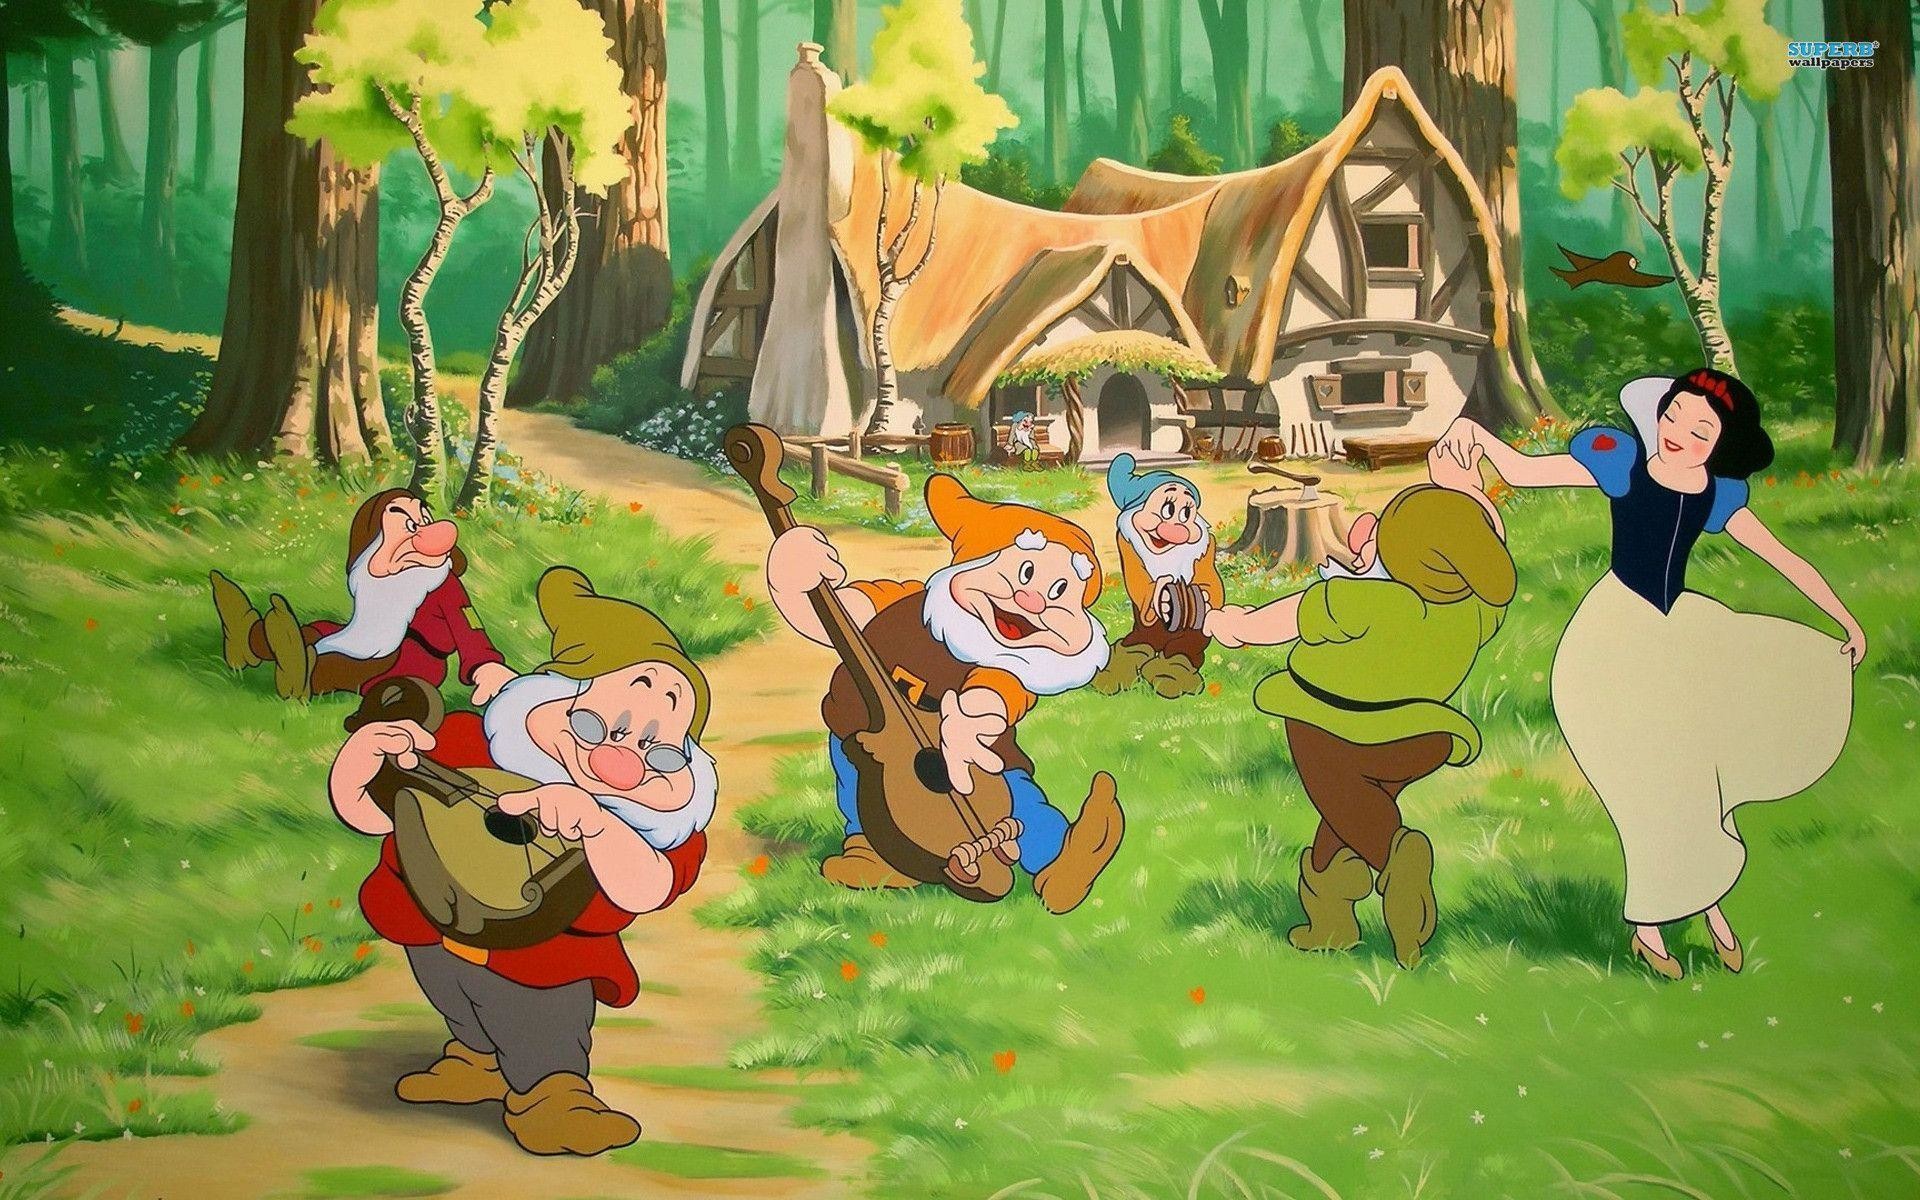 1920x1200 Snow White and the Seven Dwarfs wallpaper - Cartoon wallpapers - #